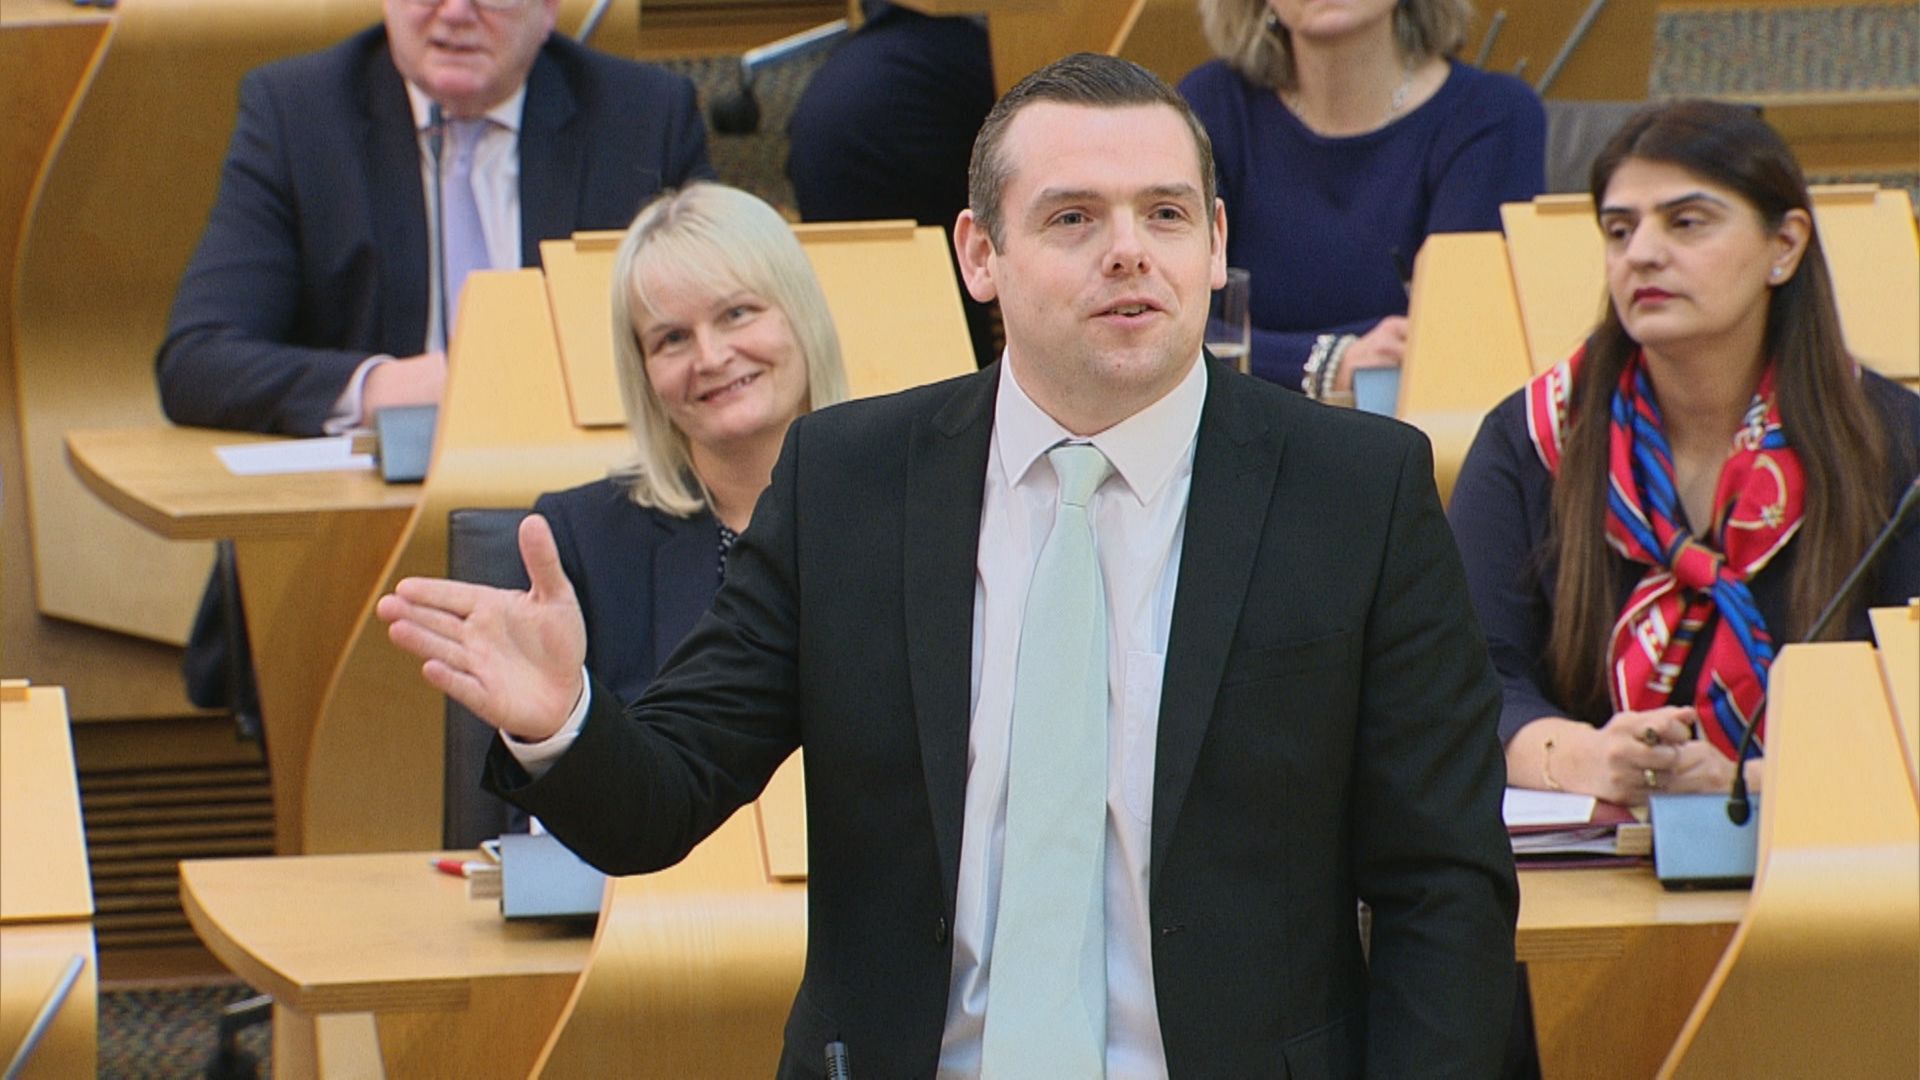 Douglas Ross wanted the SNP to make a statement to parliament on its finances.